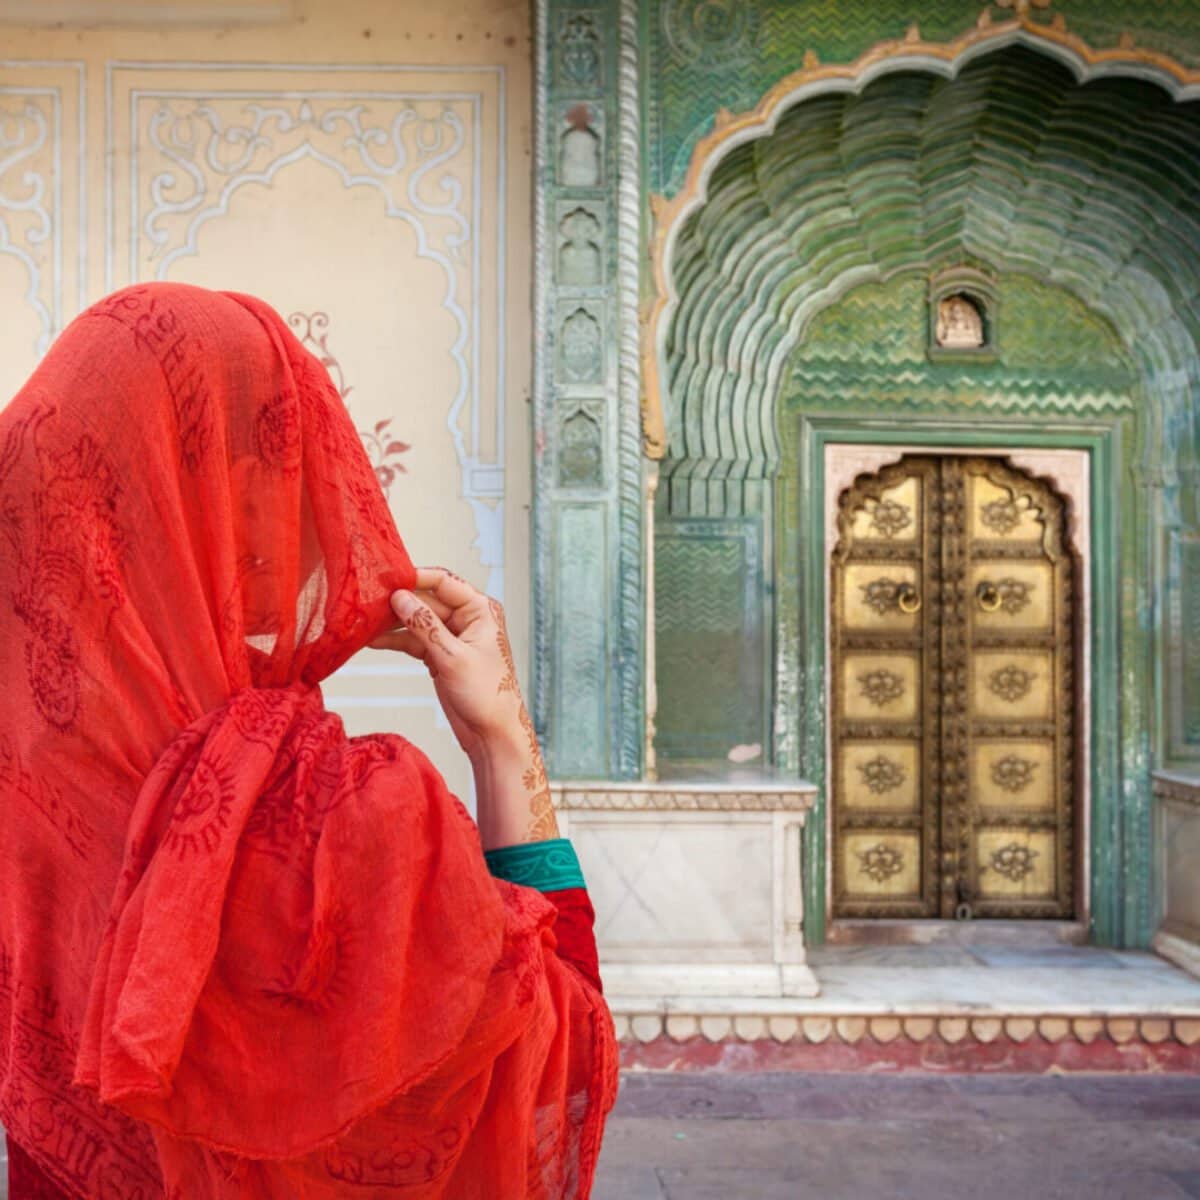 Woman in red scarf looking at green gate door in City Palace of Jaipur, Rajasthan, India